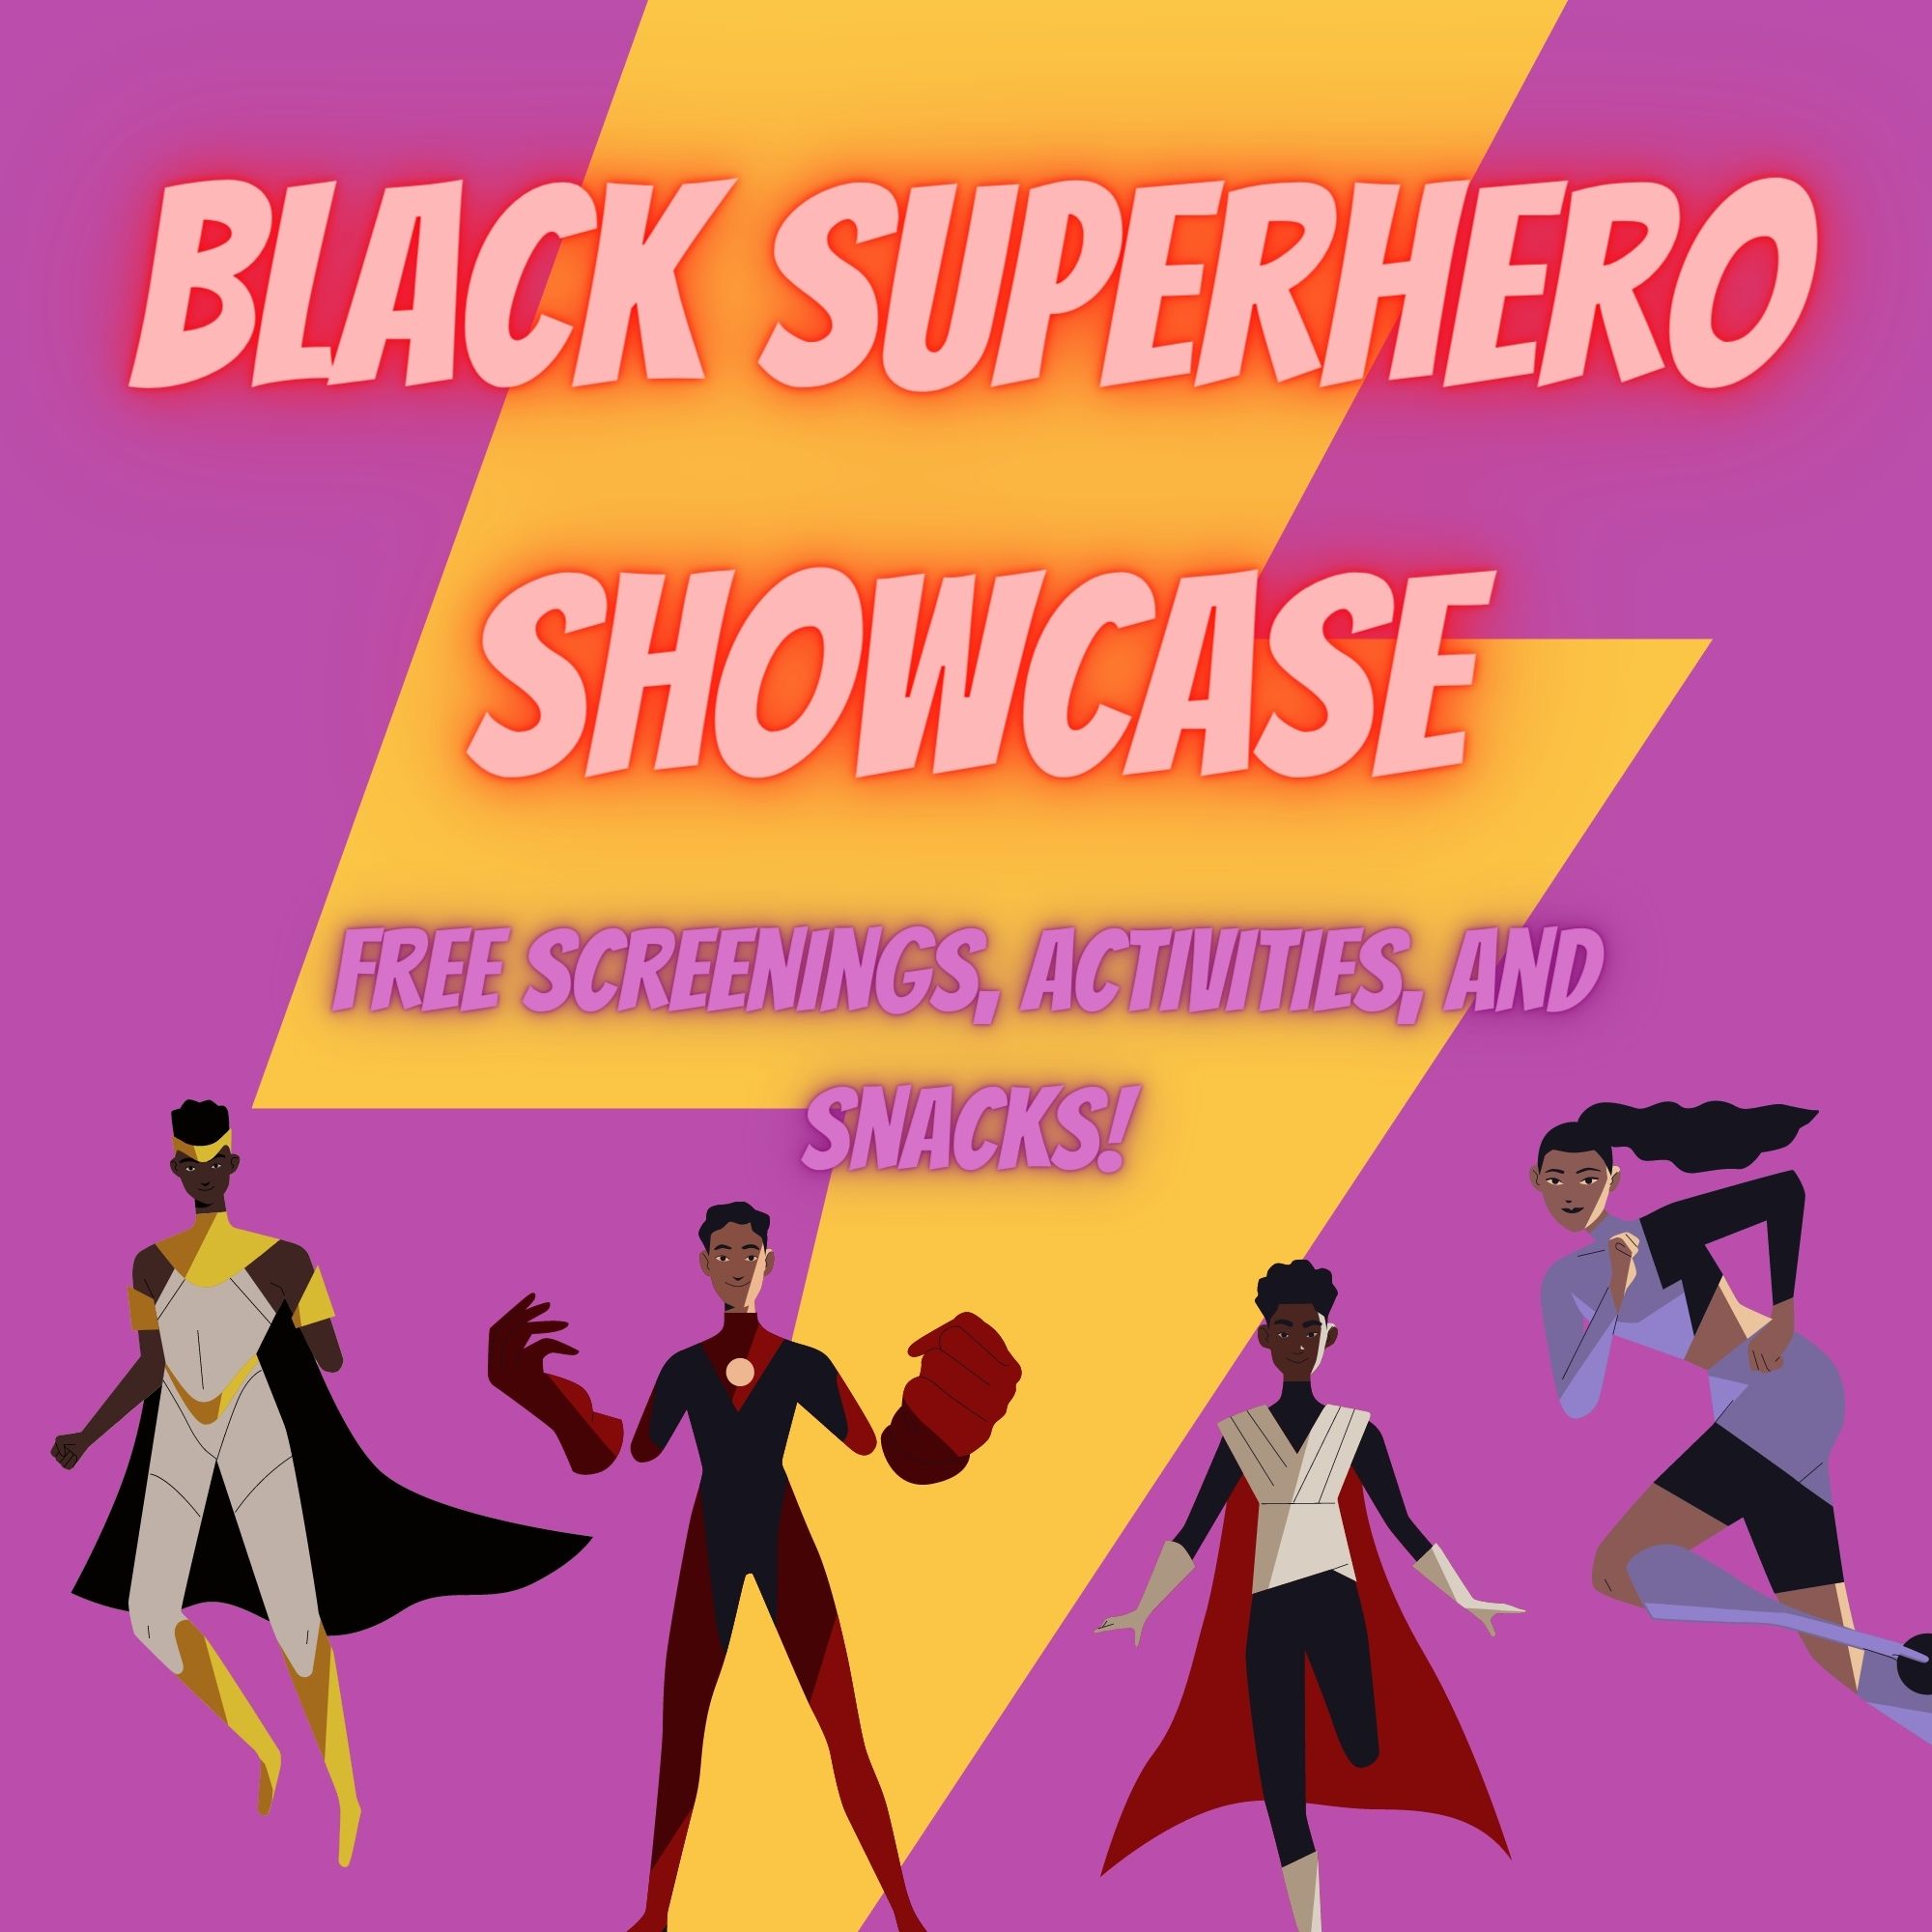 Four black superhero characters stand in front of a lighttight bolt, text above them reads Black Superhero Showcase